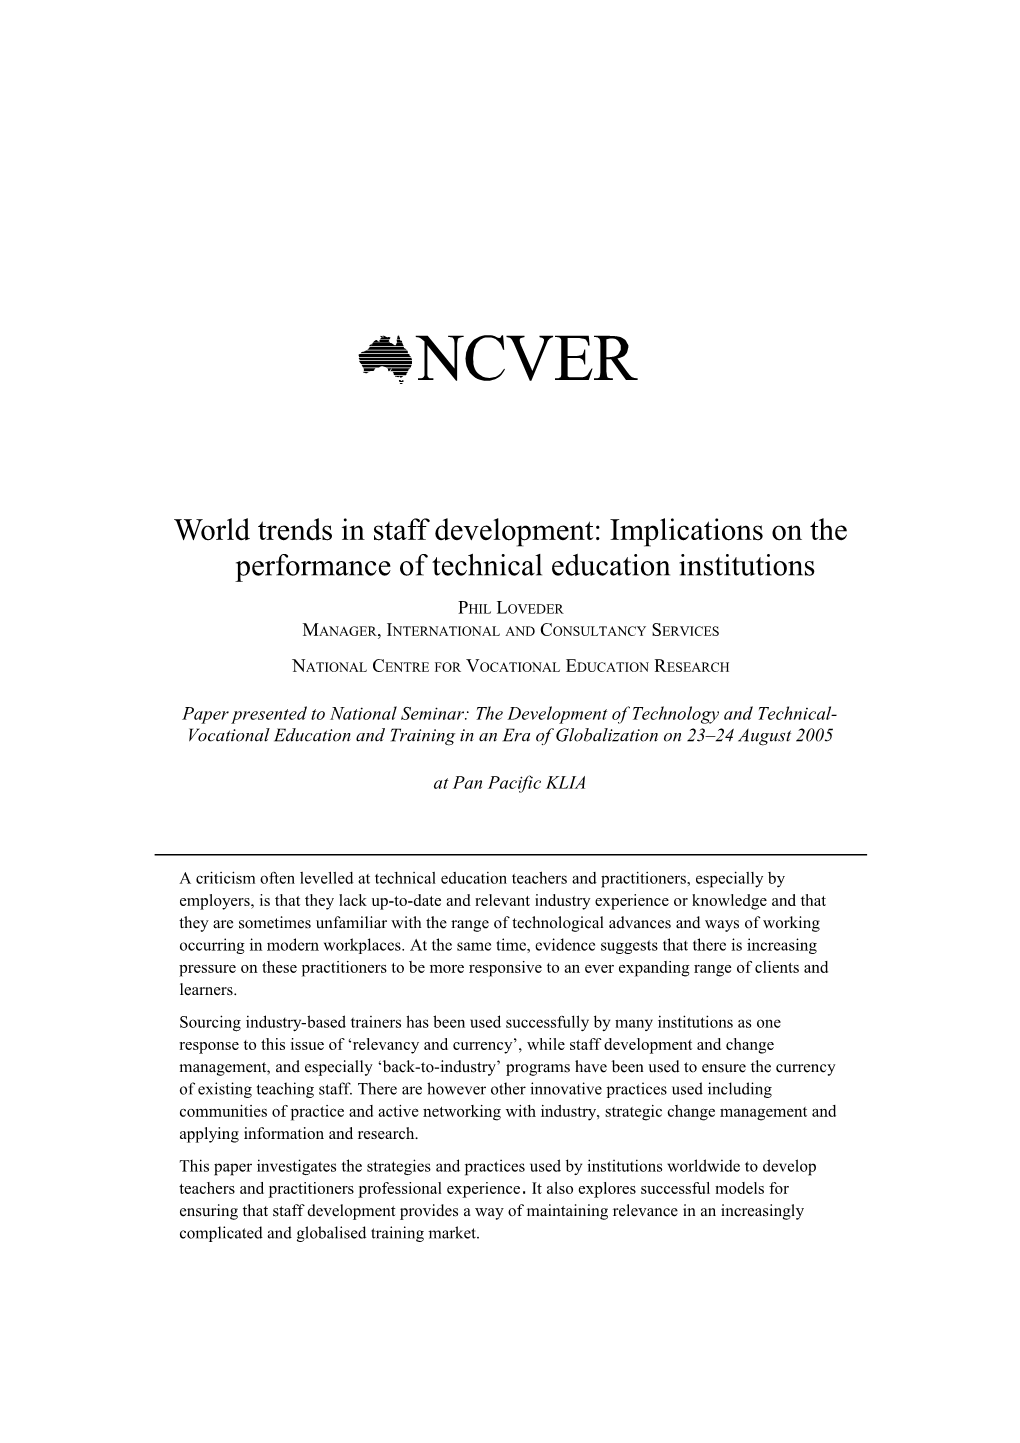 World Trends in Staff Development: Implications on the Performance Oftechnical Education